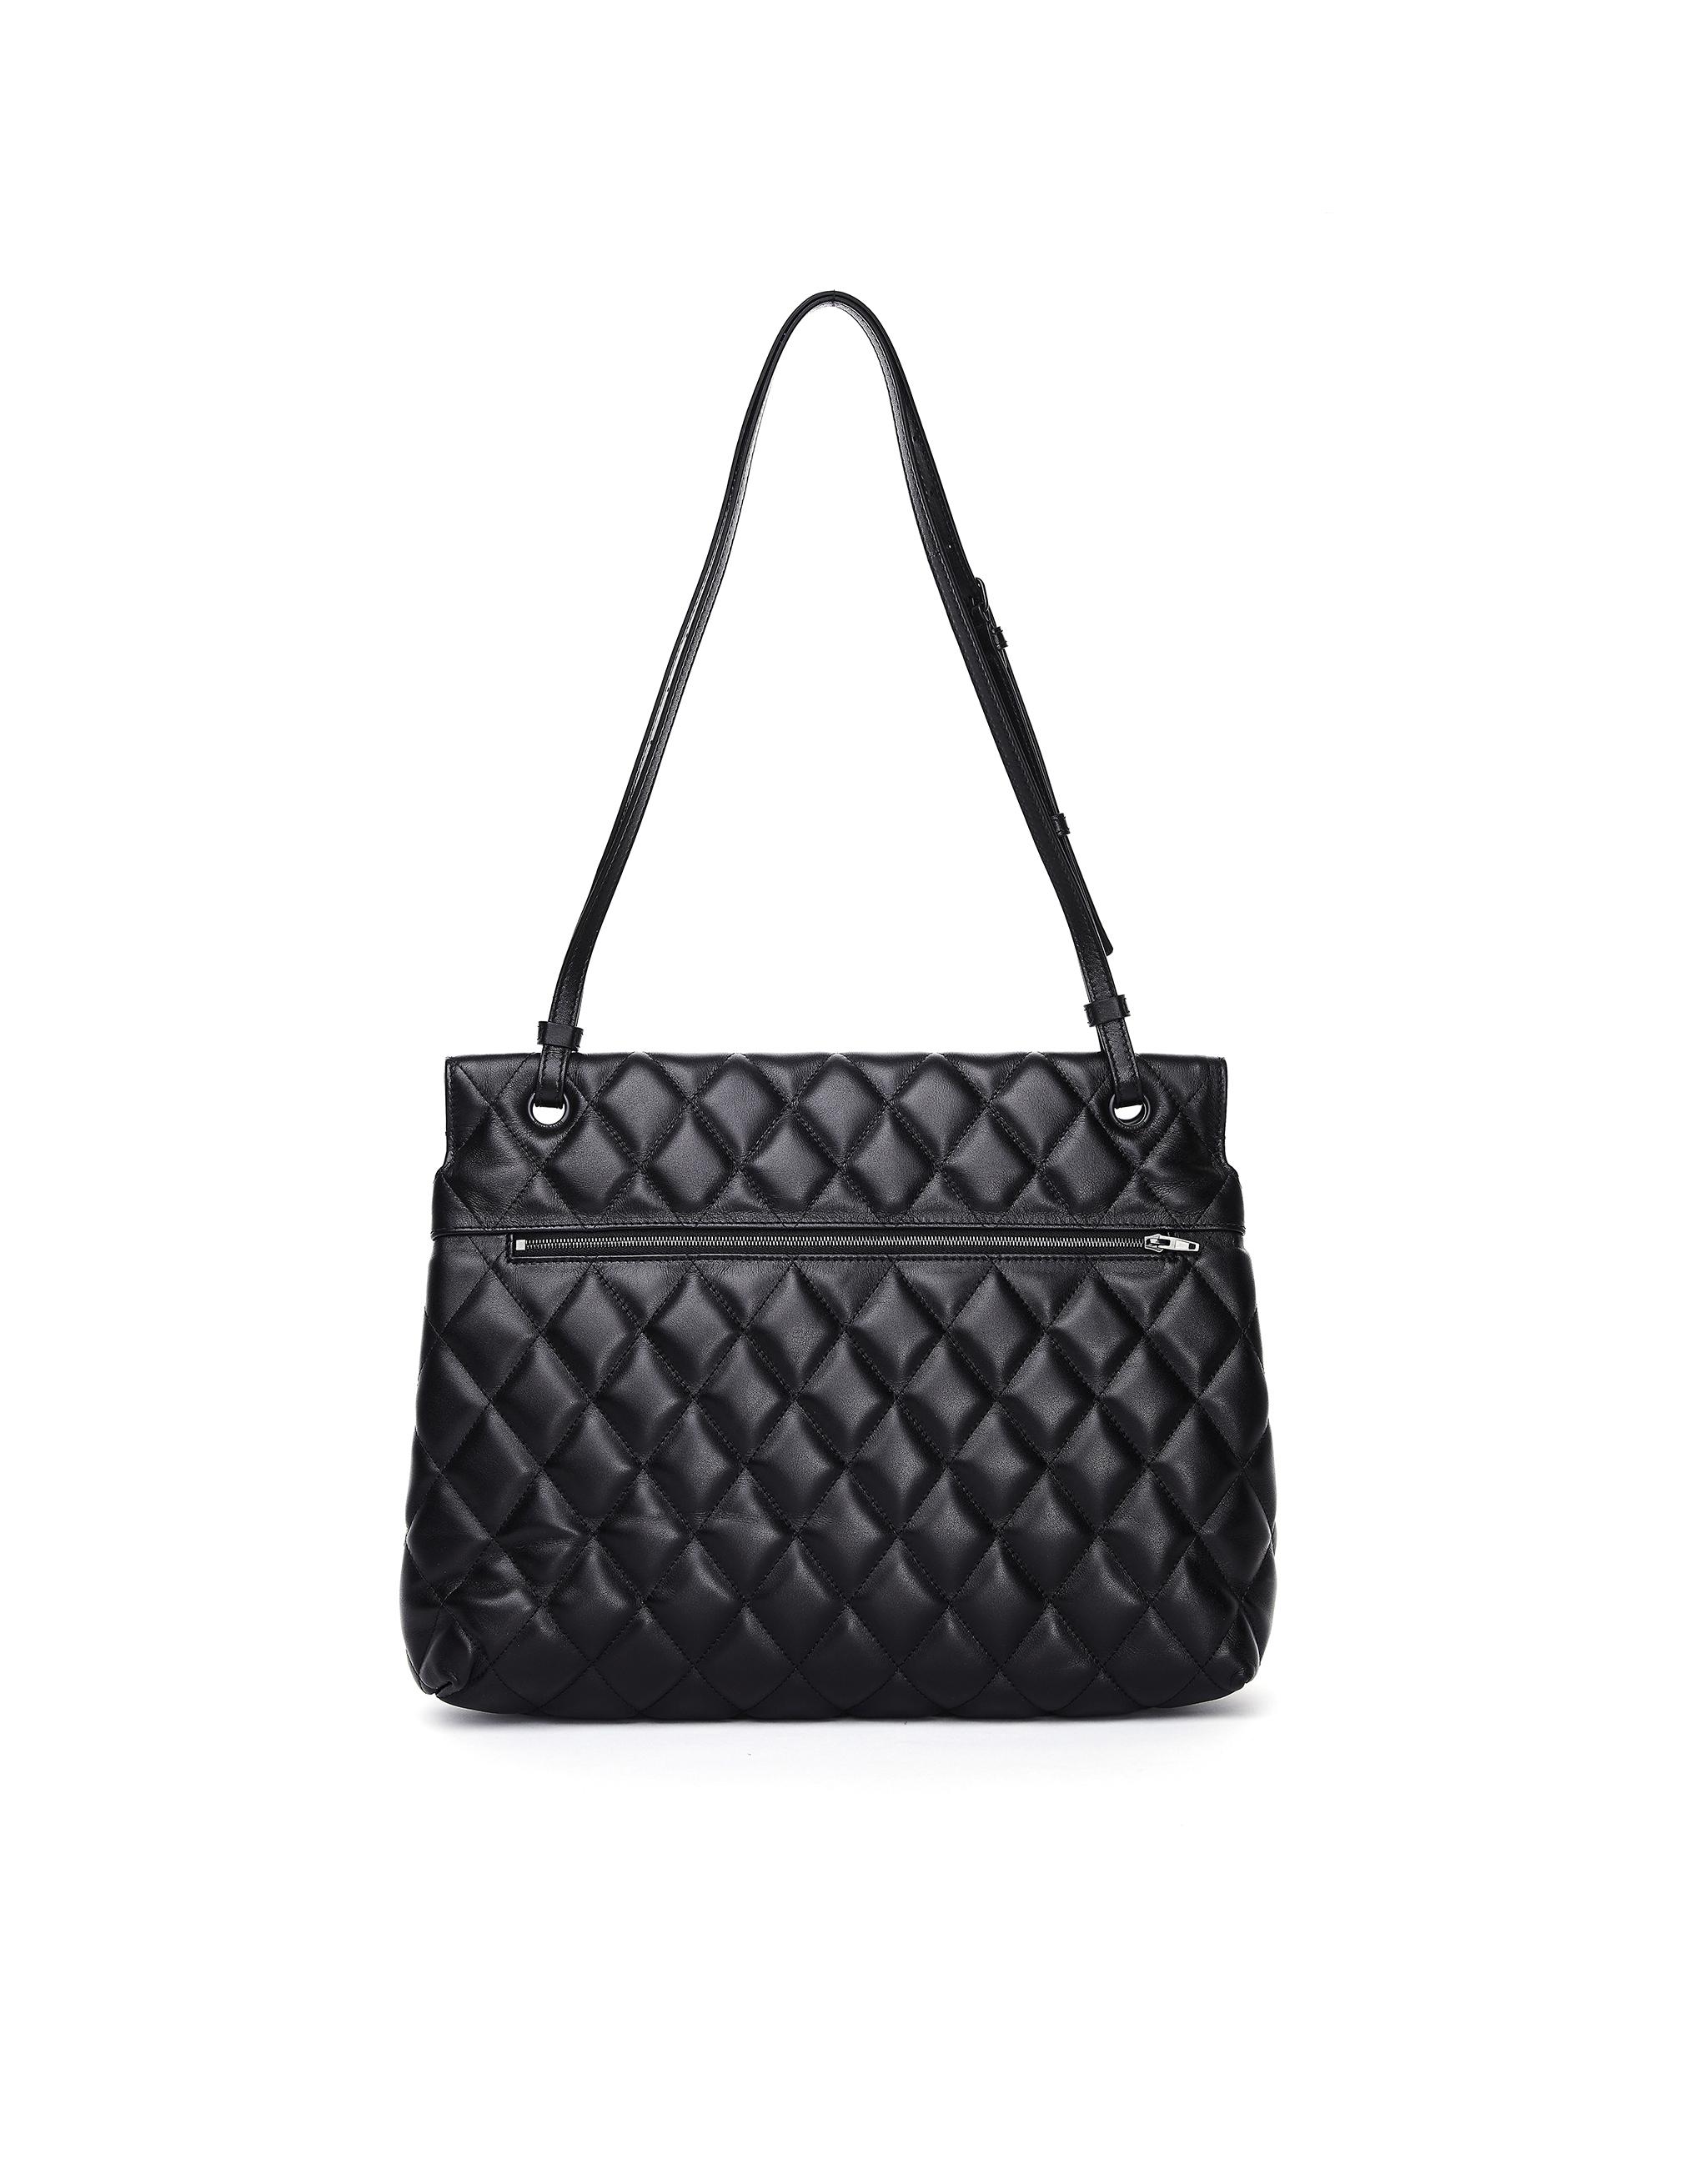 Balenciaga Touch L Quilted Leather Bag in Black - Lyst